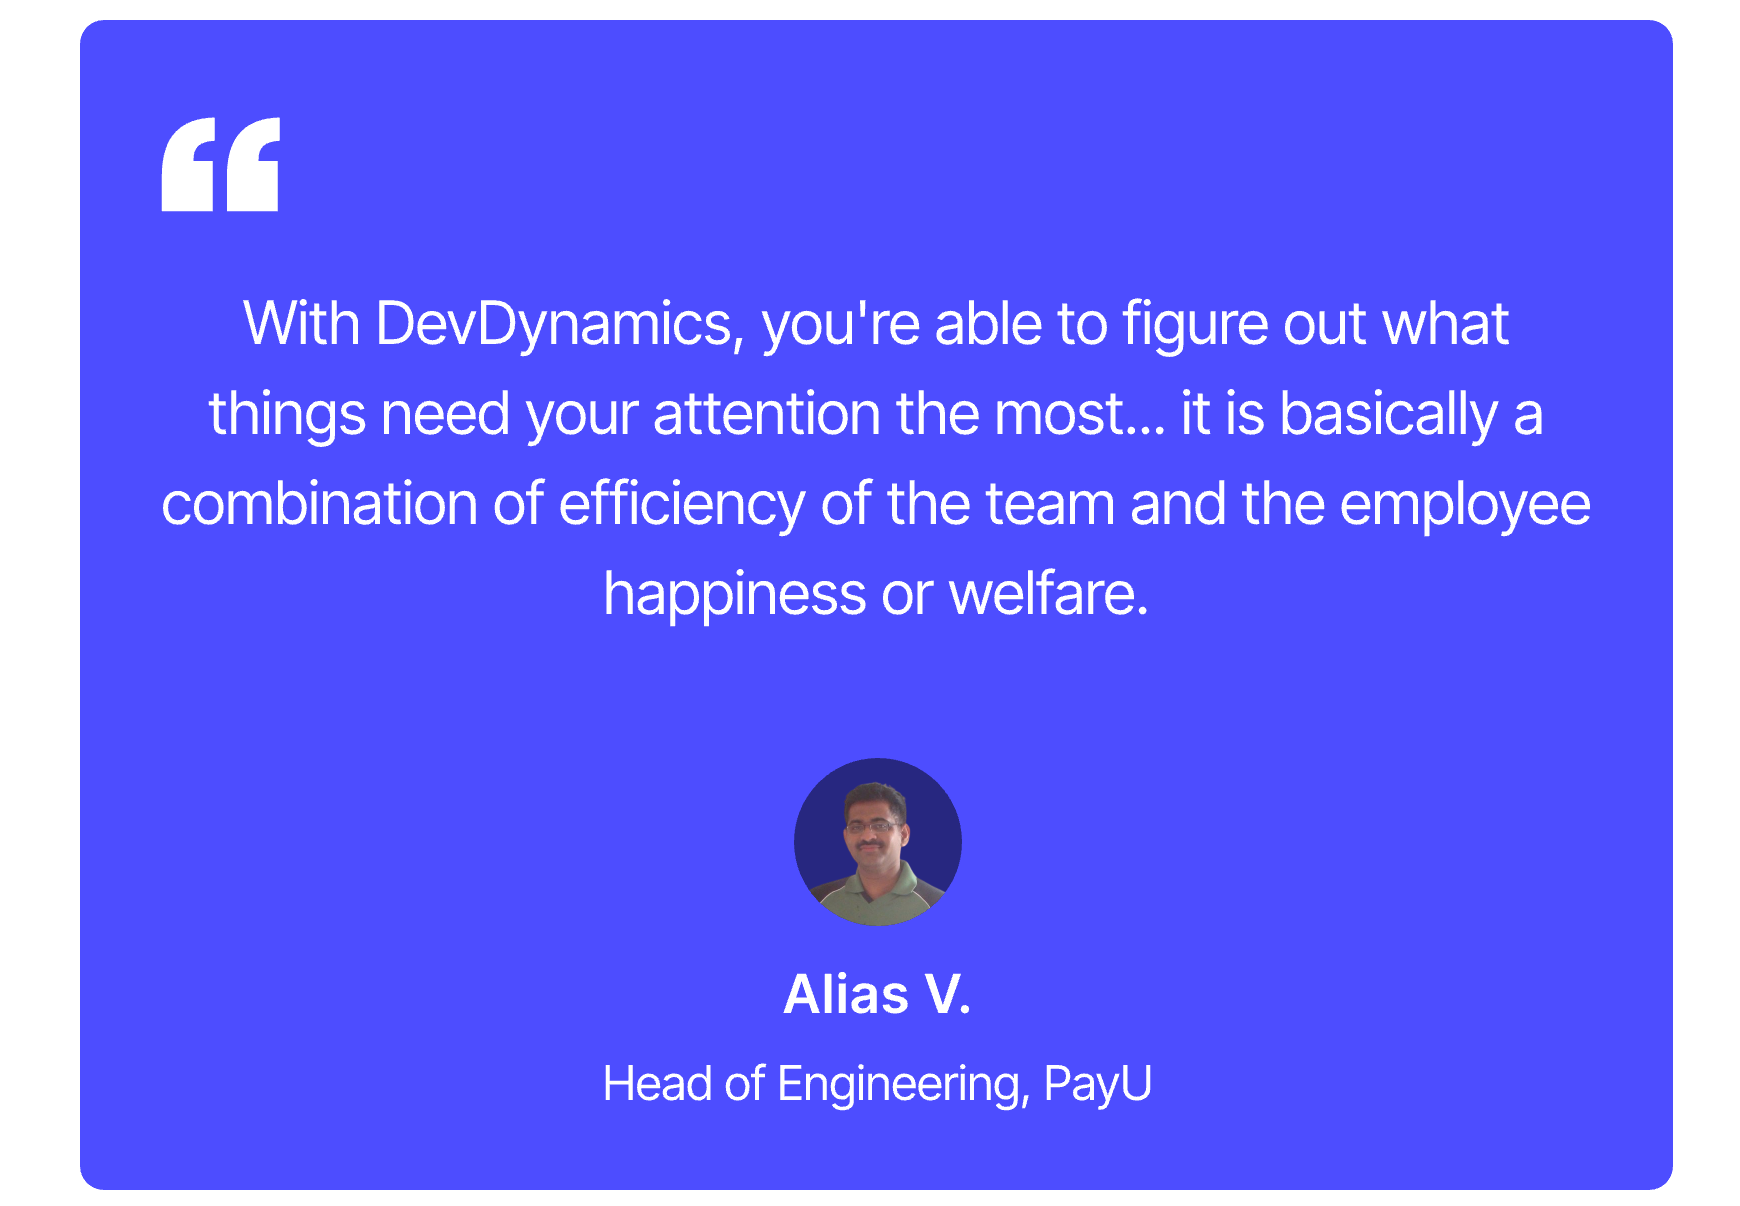 Case Study: How PayU's Engineering Managers Enhanced Weekly Meetings with DevDynamics